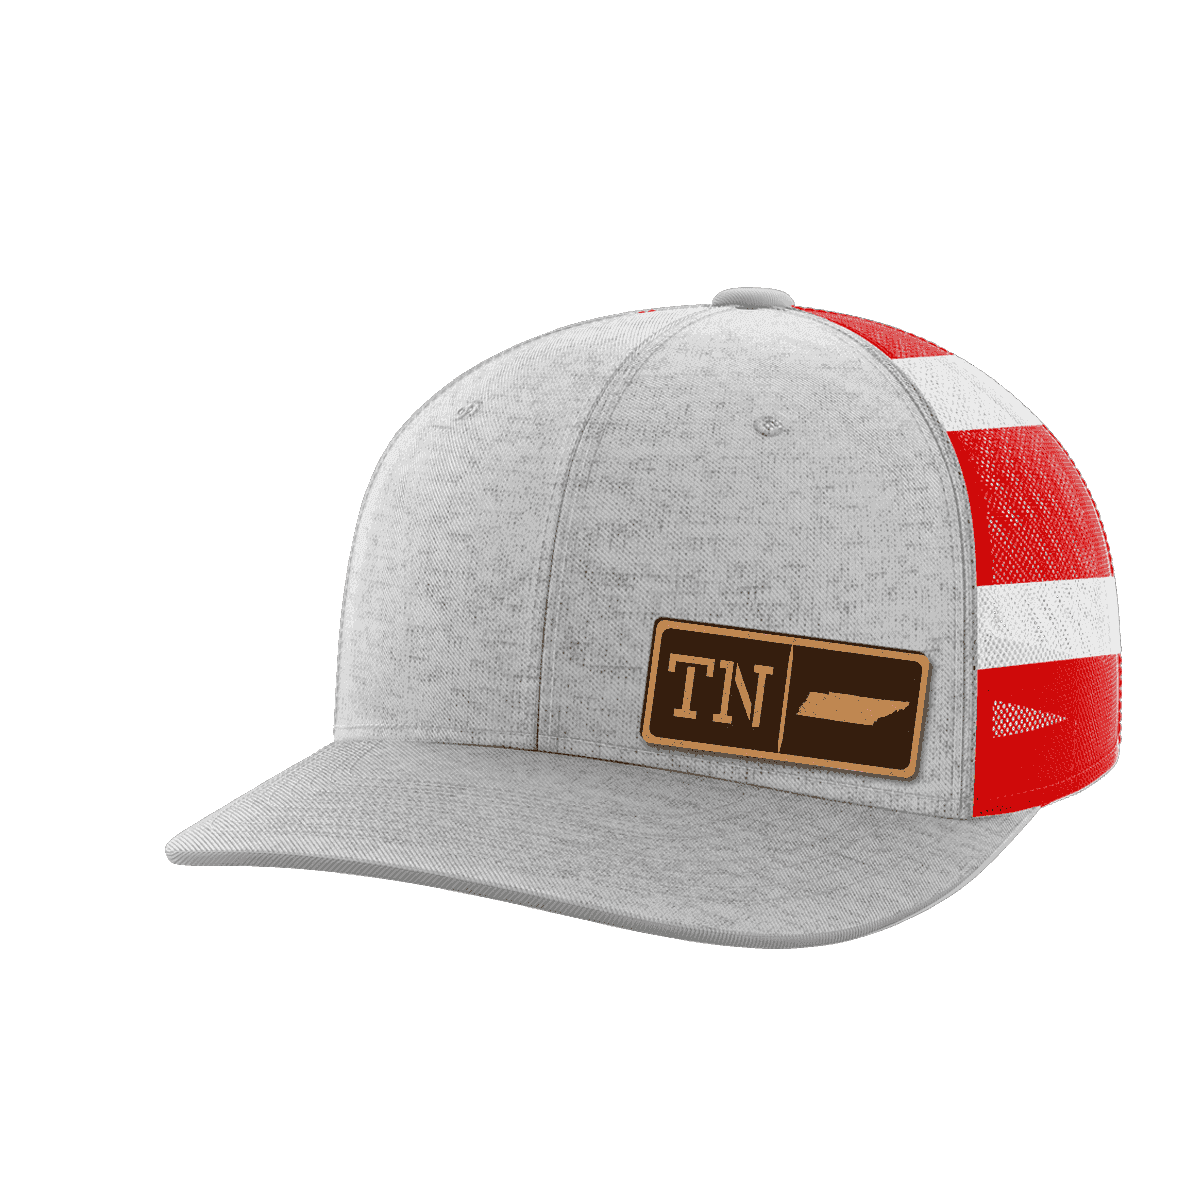 Thumbnail for Tennessee Homegrown Hats - Greater Half